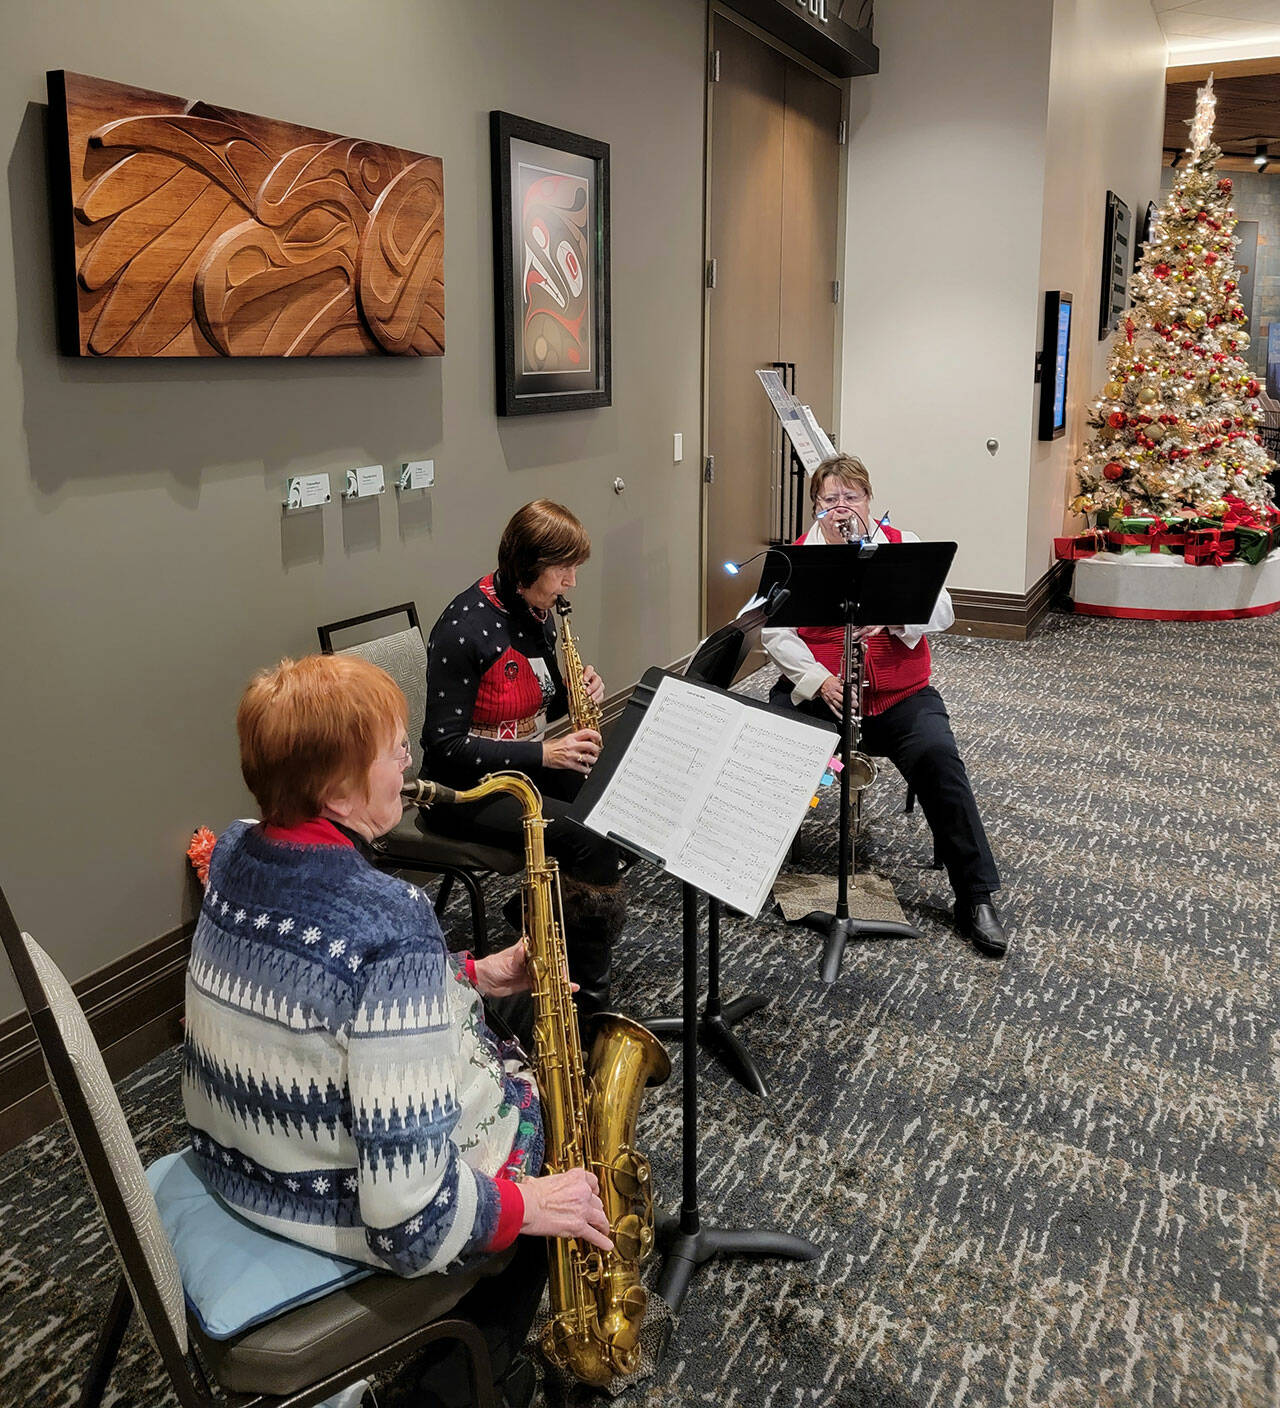 Sequim City Band Sax Duo + One play at 7 Cedars Hotel on Dec. 12. Musicians include: Mary Lowry, tenor saxophone; Debbi Soderstrom, soprano saxophone, and Vicky Blakesley, bass clarinet. Photo by Dave Proebstel